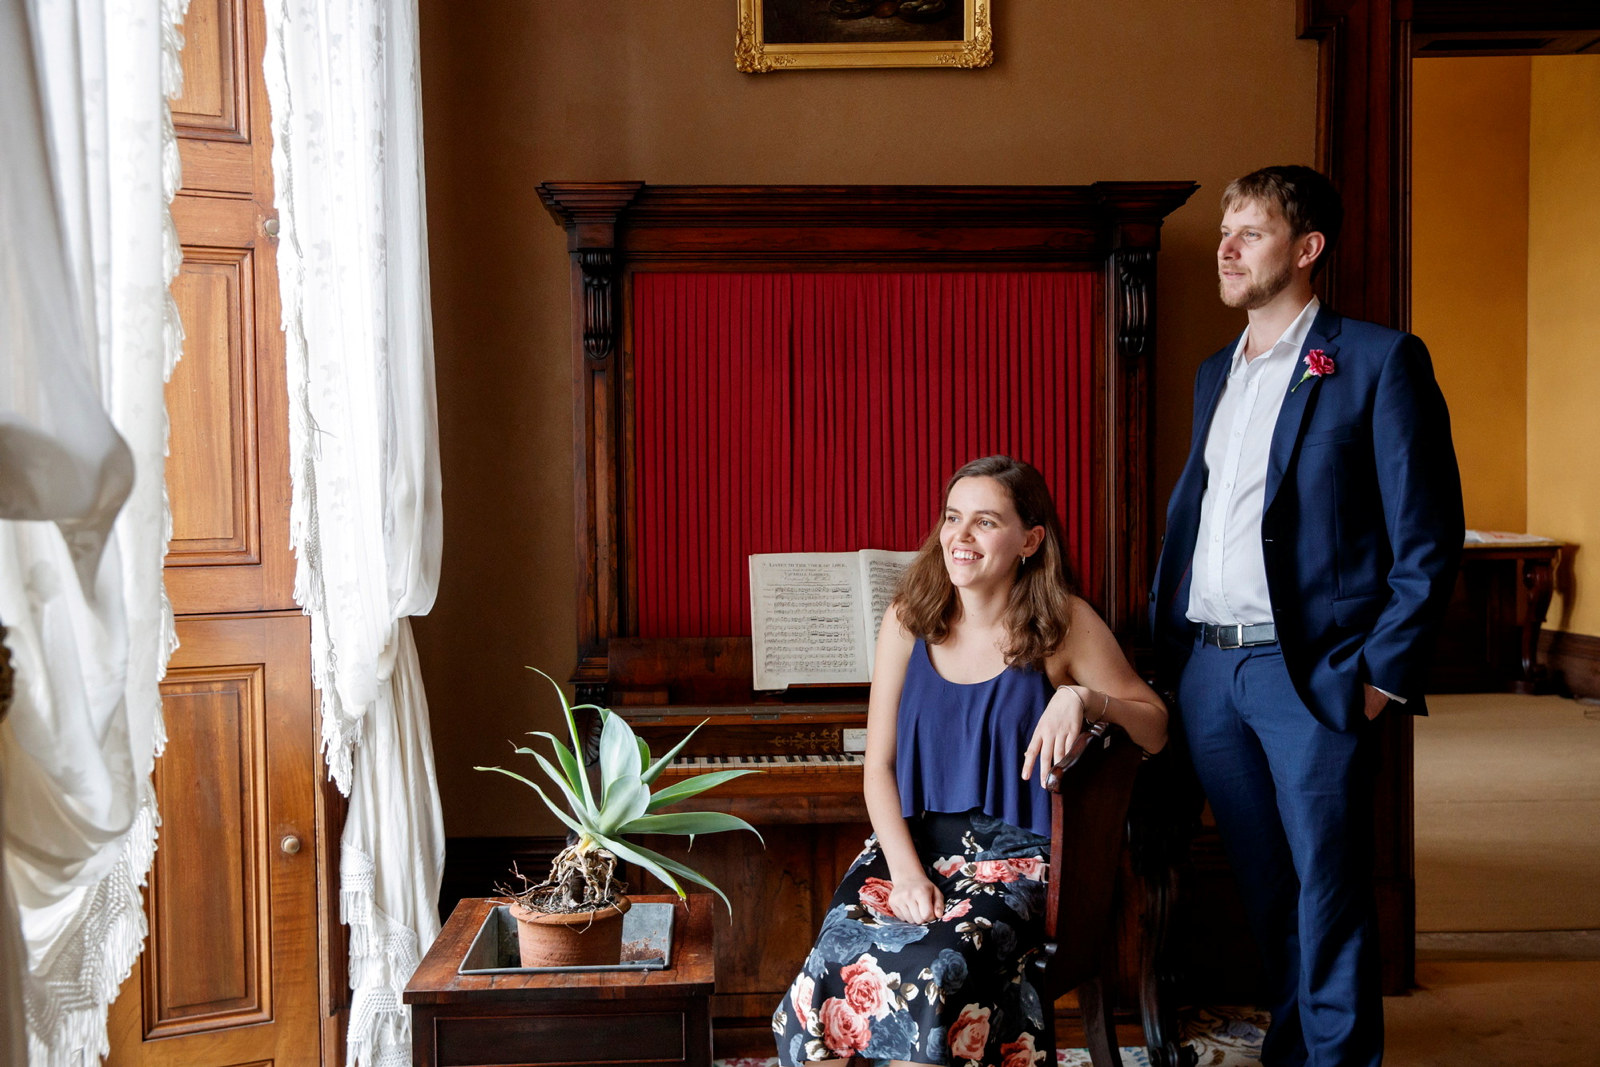 Performers James Doig and Nyssa Milligan in the drawing room at Elizabeth Bay House.